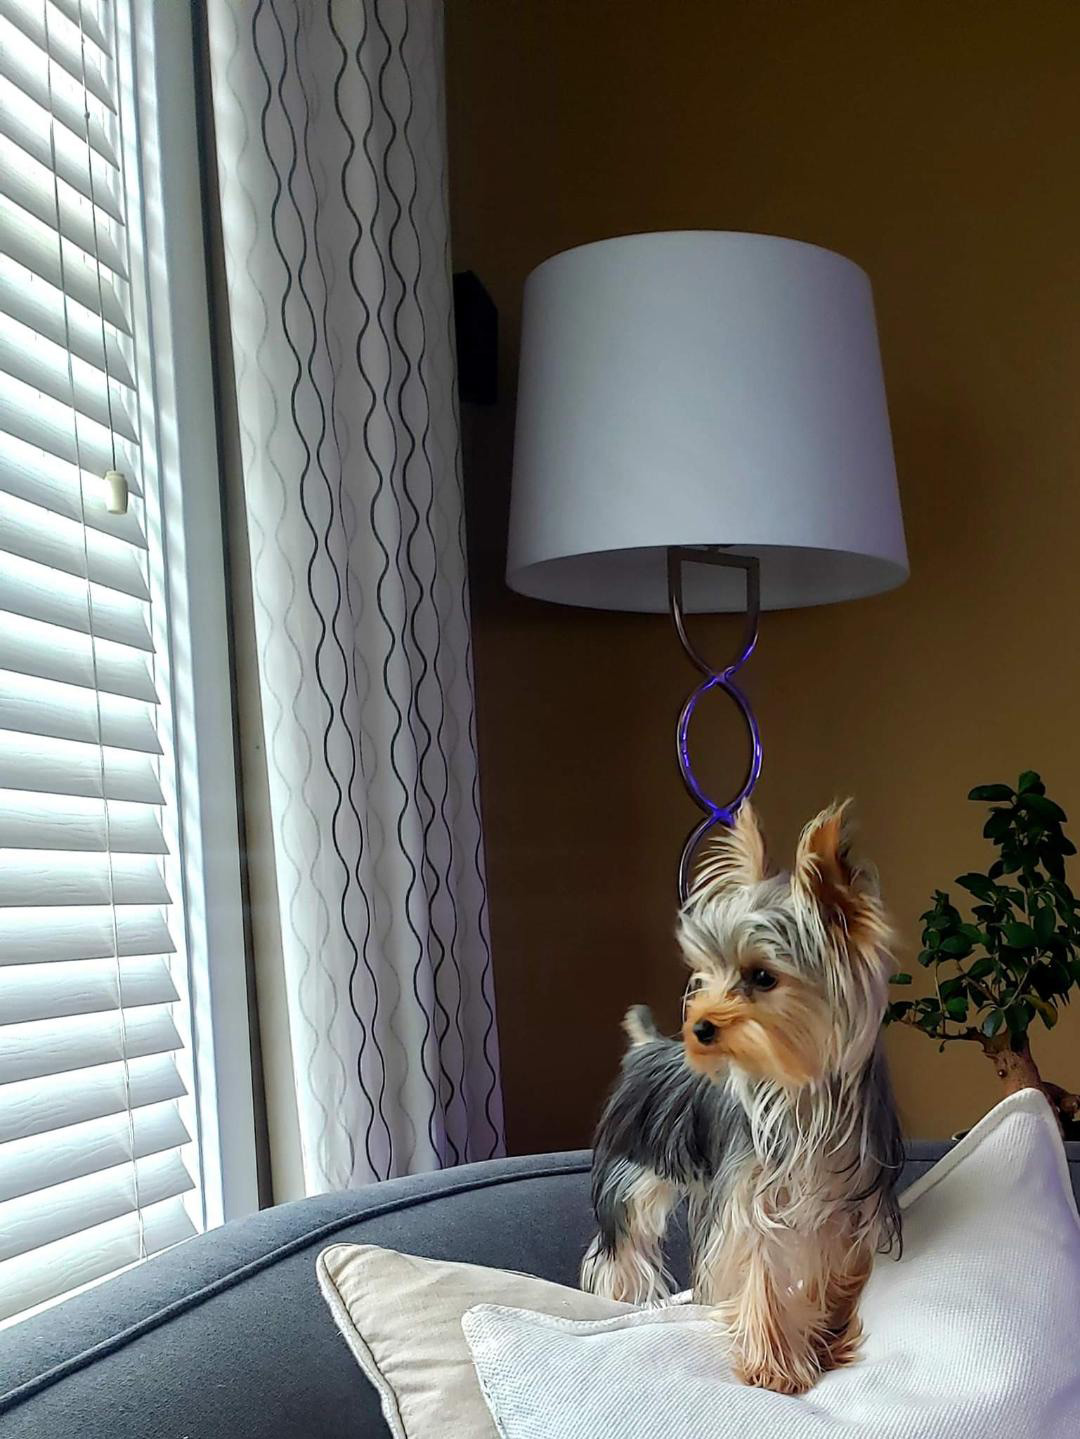 Daniel C. sent a picture of his stunning one-year-old Yorkshire Terrier Pancho on the couch, his favorite spot, looking out the window.